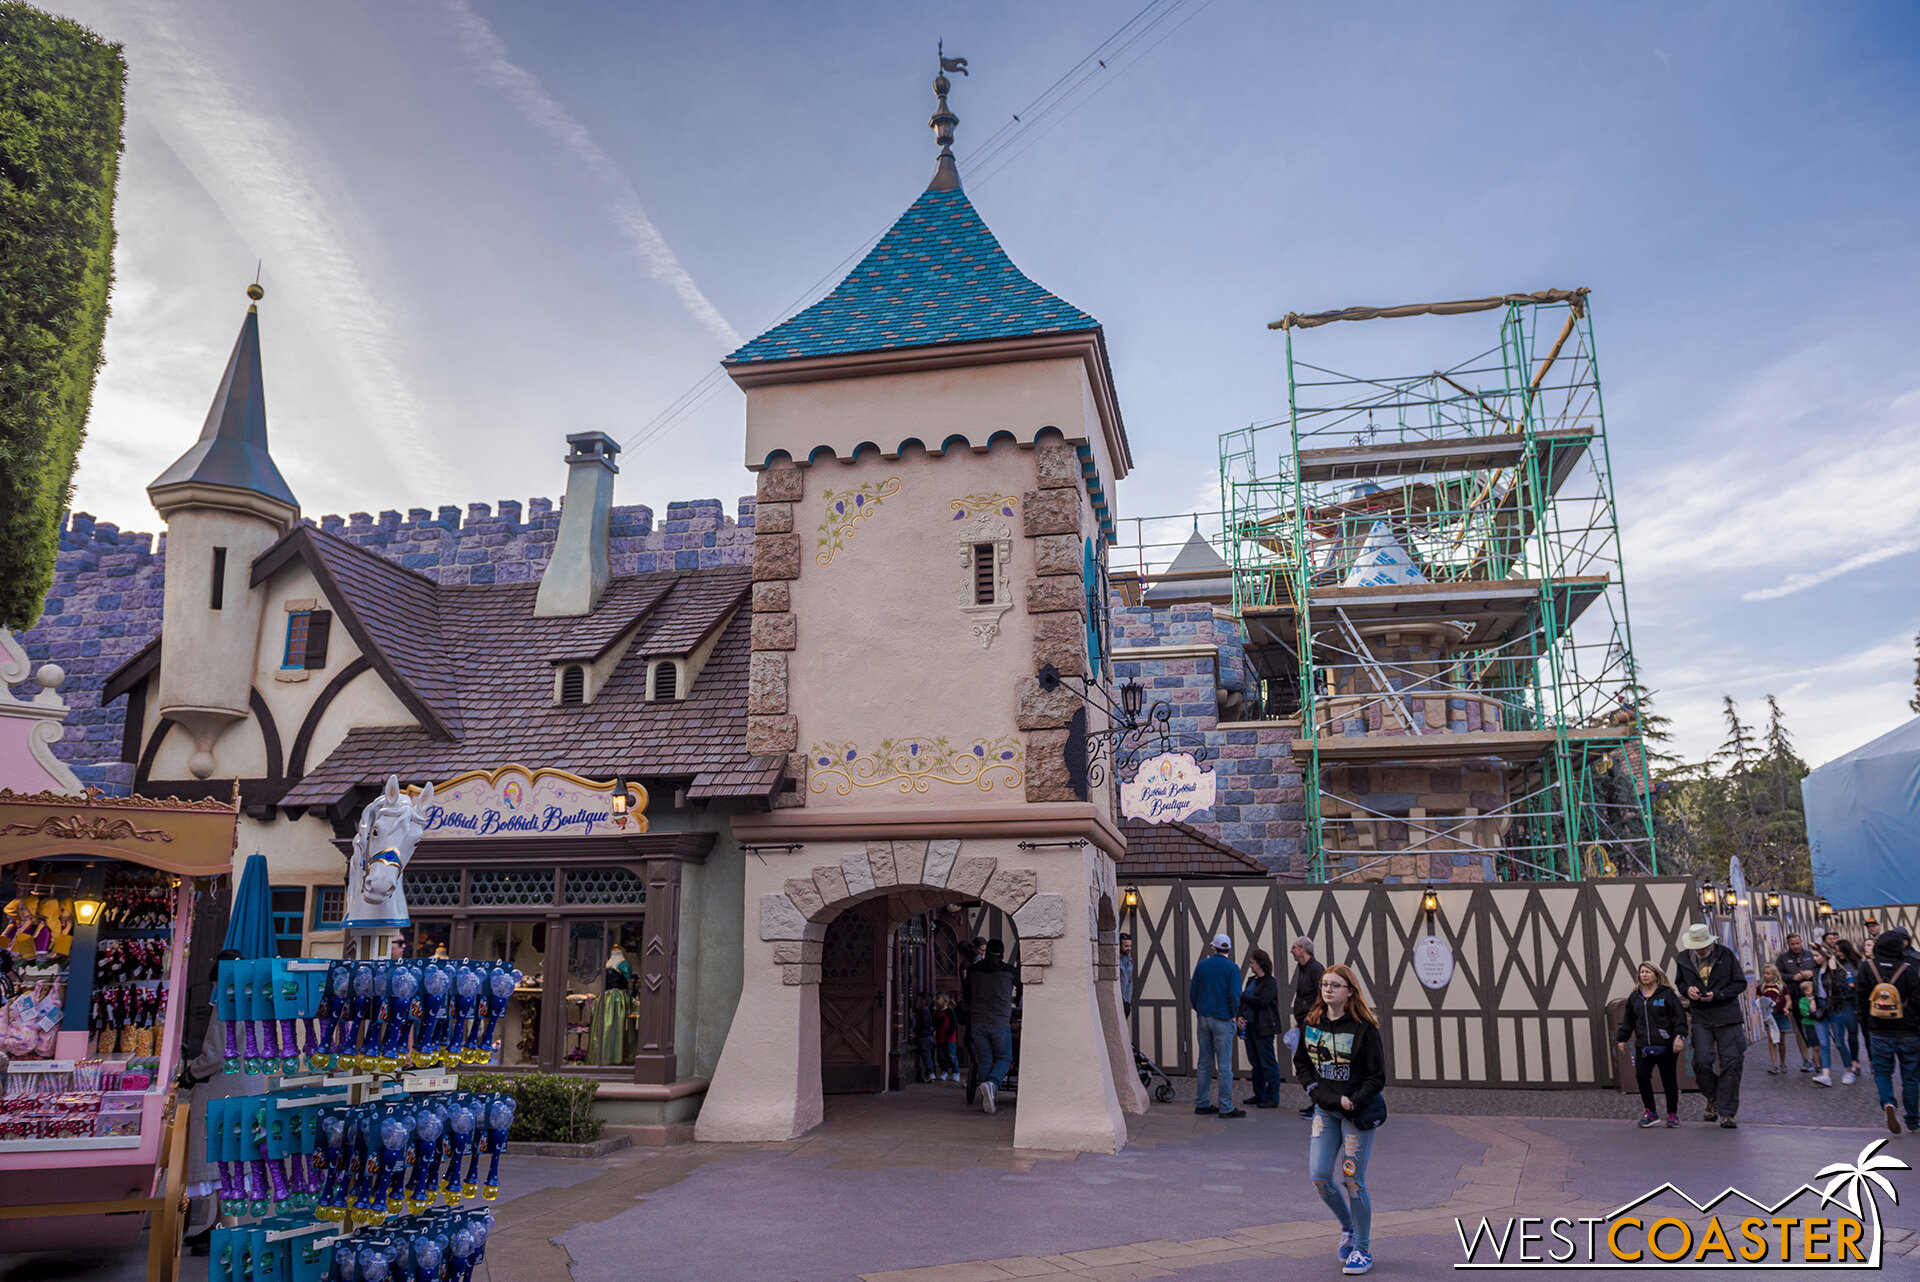  The tarps are down from Snow White! 